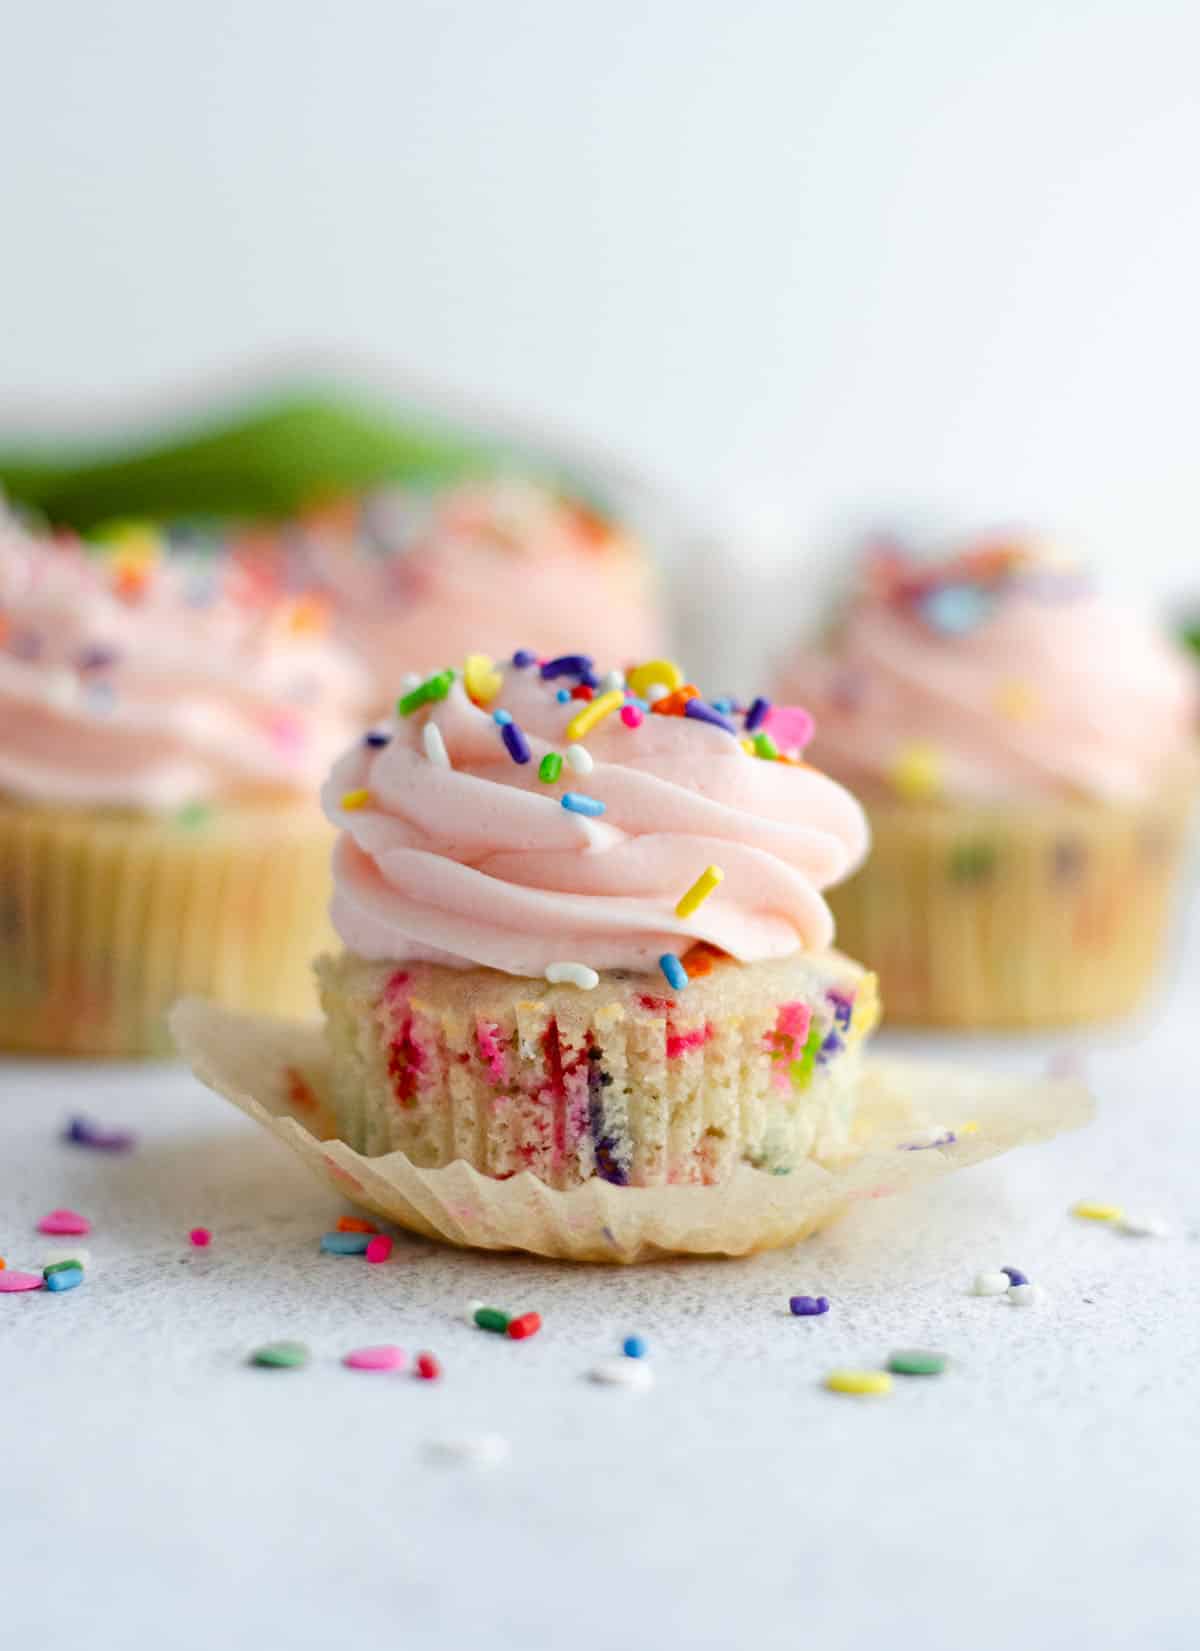 homemade funfetti cupcake with pink frosting and sitting in a wrapper that has been taken off